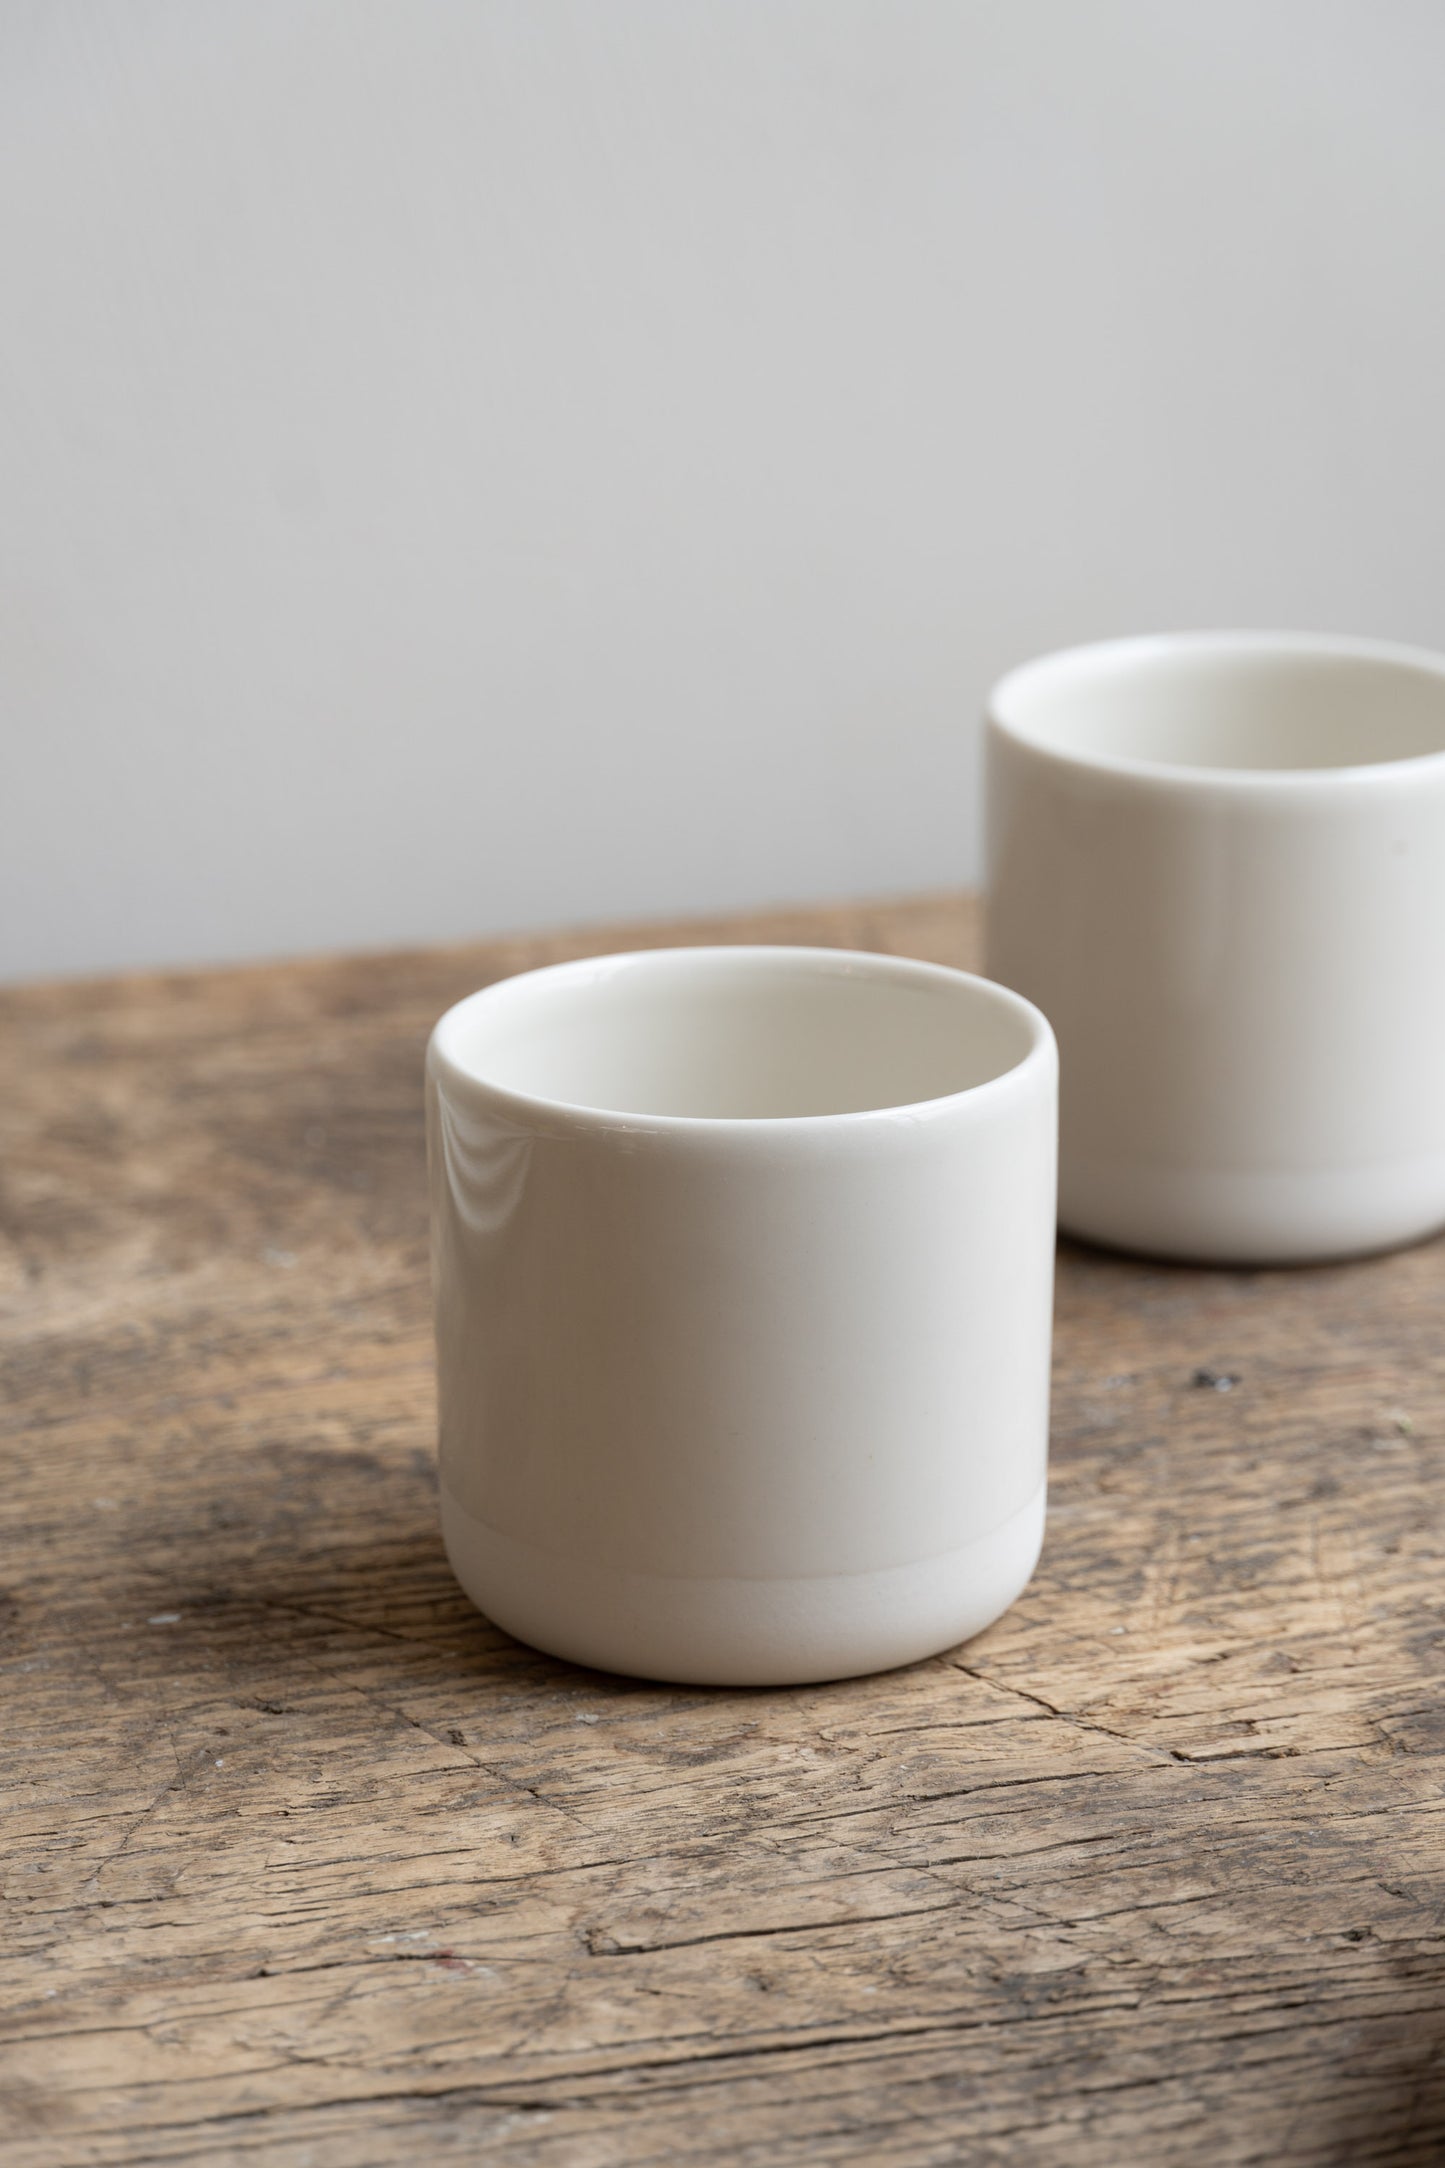 Two white Antibes Cups by Jars Ceramistes on wooden table.